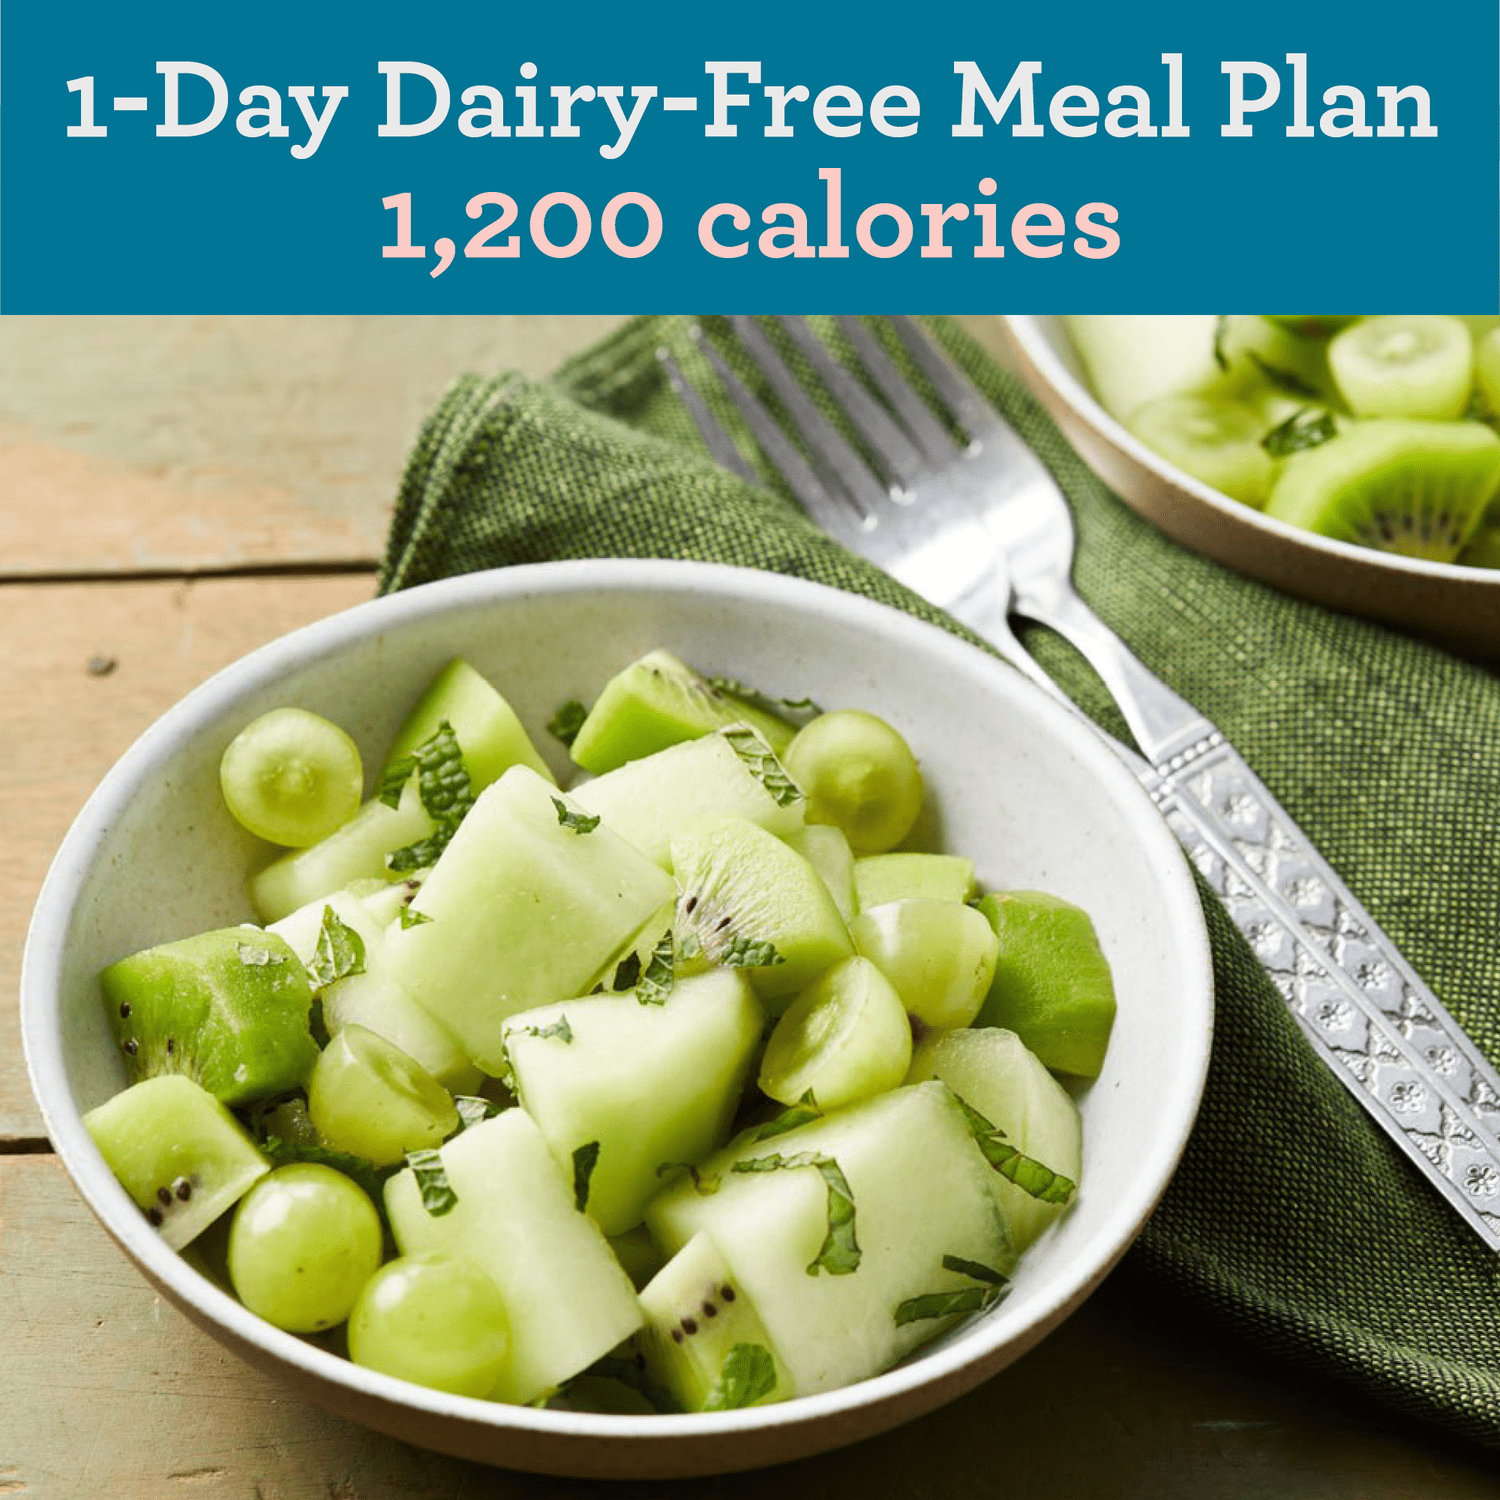 1-Day Dairy-Free Meal Plan: 1,200 Calories